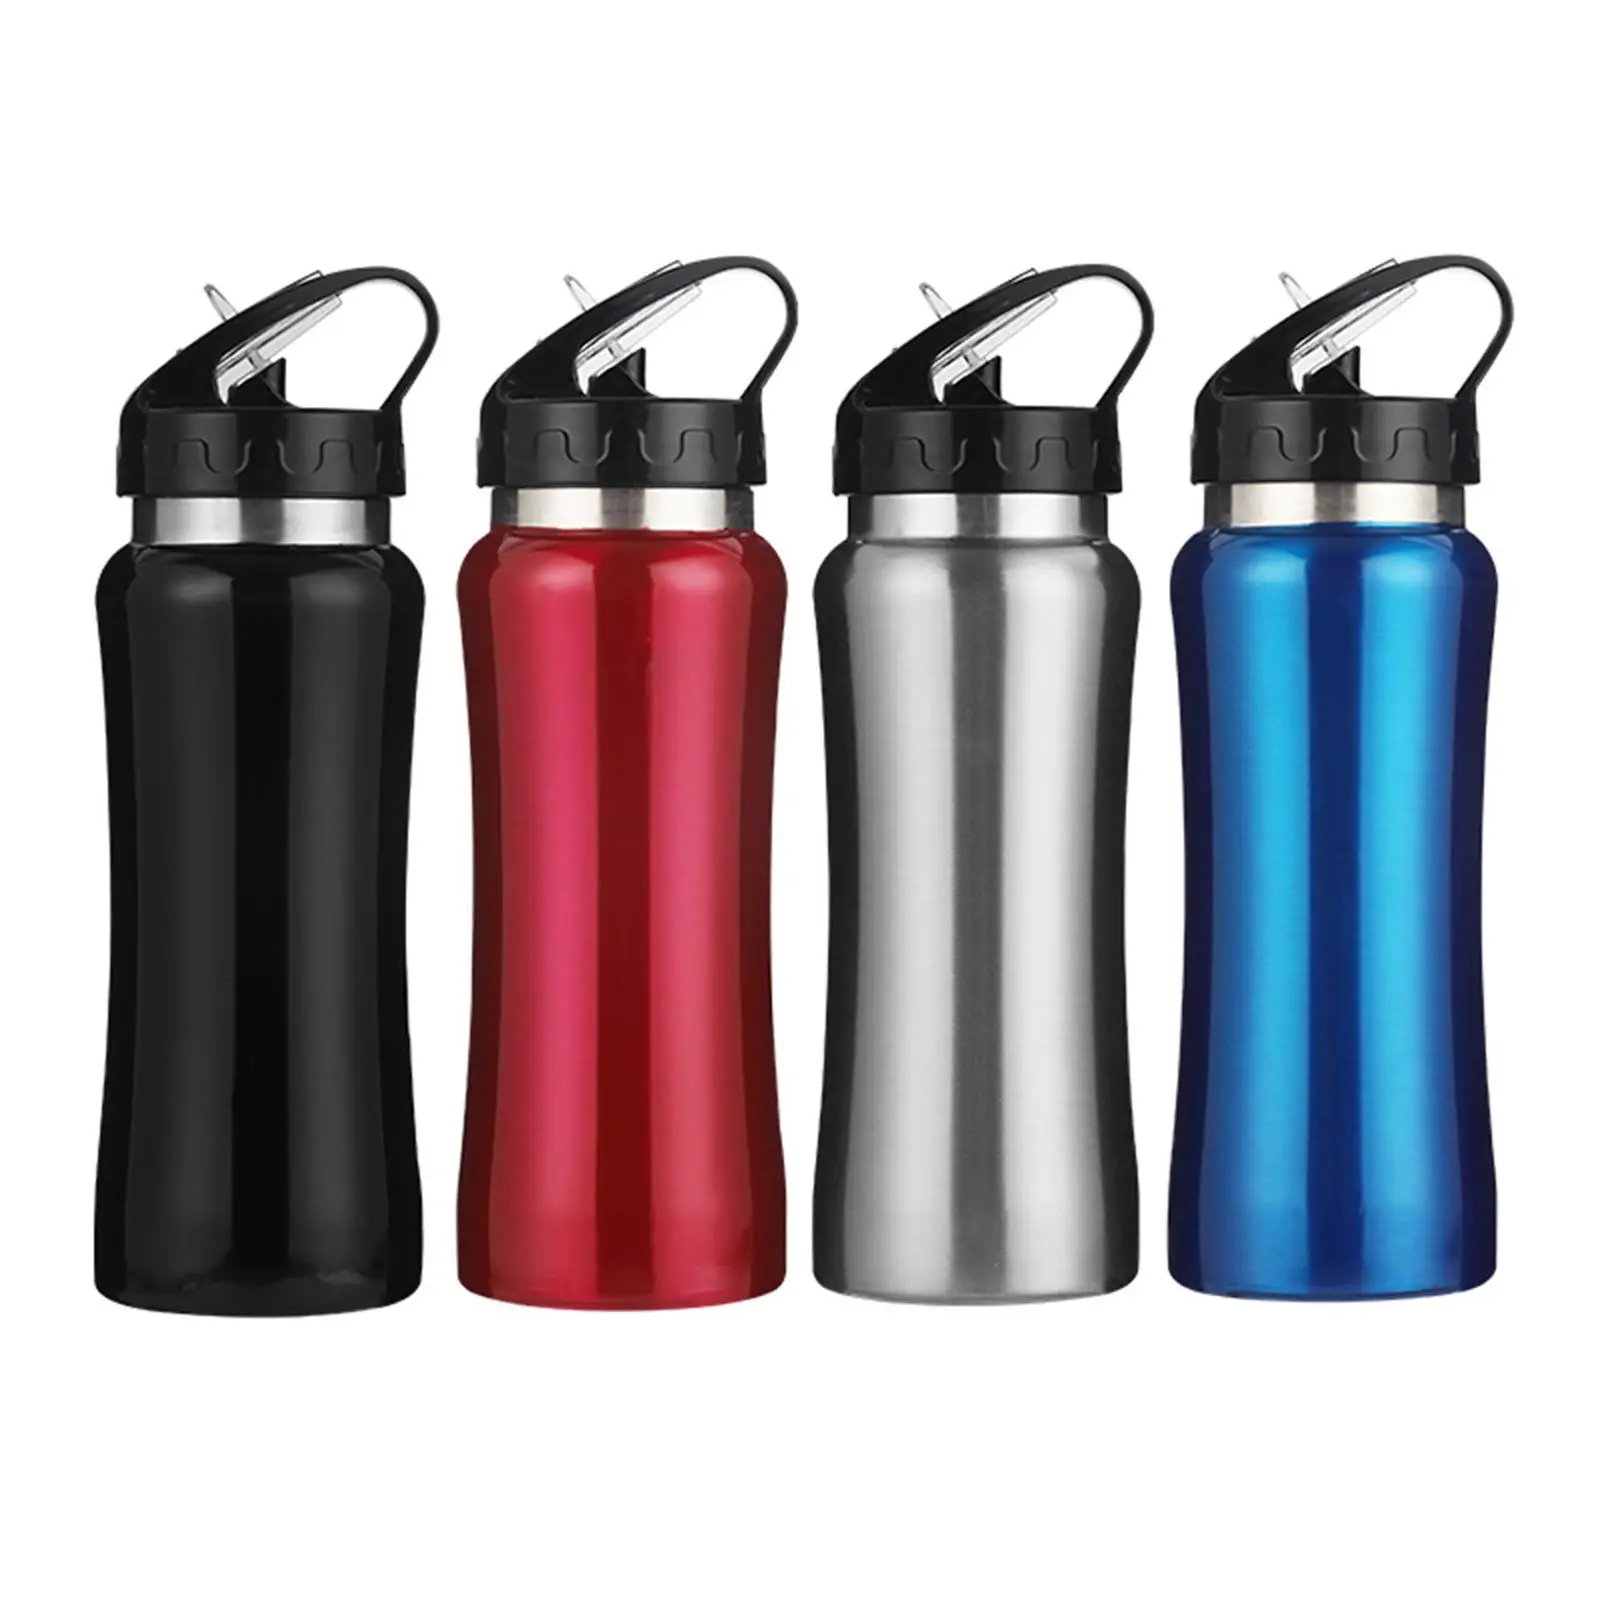 700ml Bottle Drinking Kettle for Outdoor Sports Fitness Running Gym Workout Cycling Travel Camping Accessories